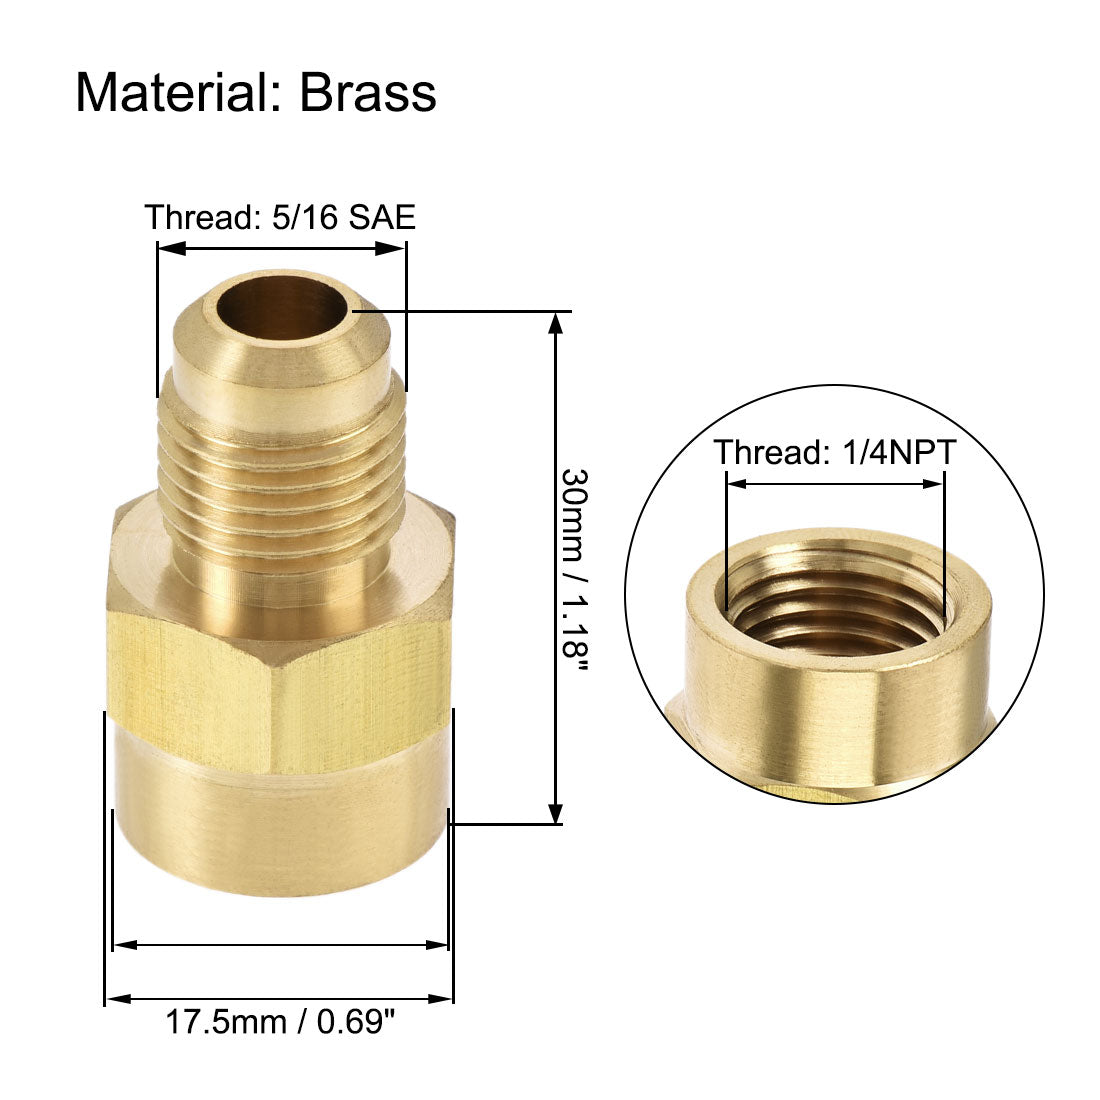 Uxcell Uxcell Brass Pipe fitting, 1/4 SAE Flare Male to 1/4NPT Female Thread, Tubing Adapter Hose Connector, for Air Conditioner Refrigeration, 2Pcs